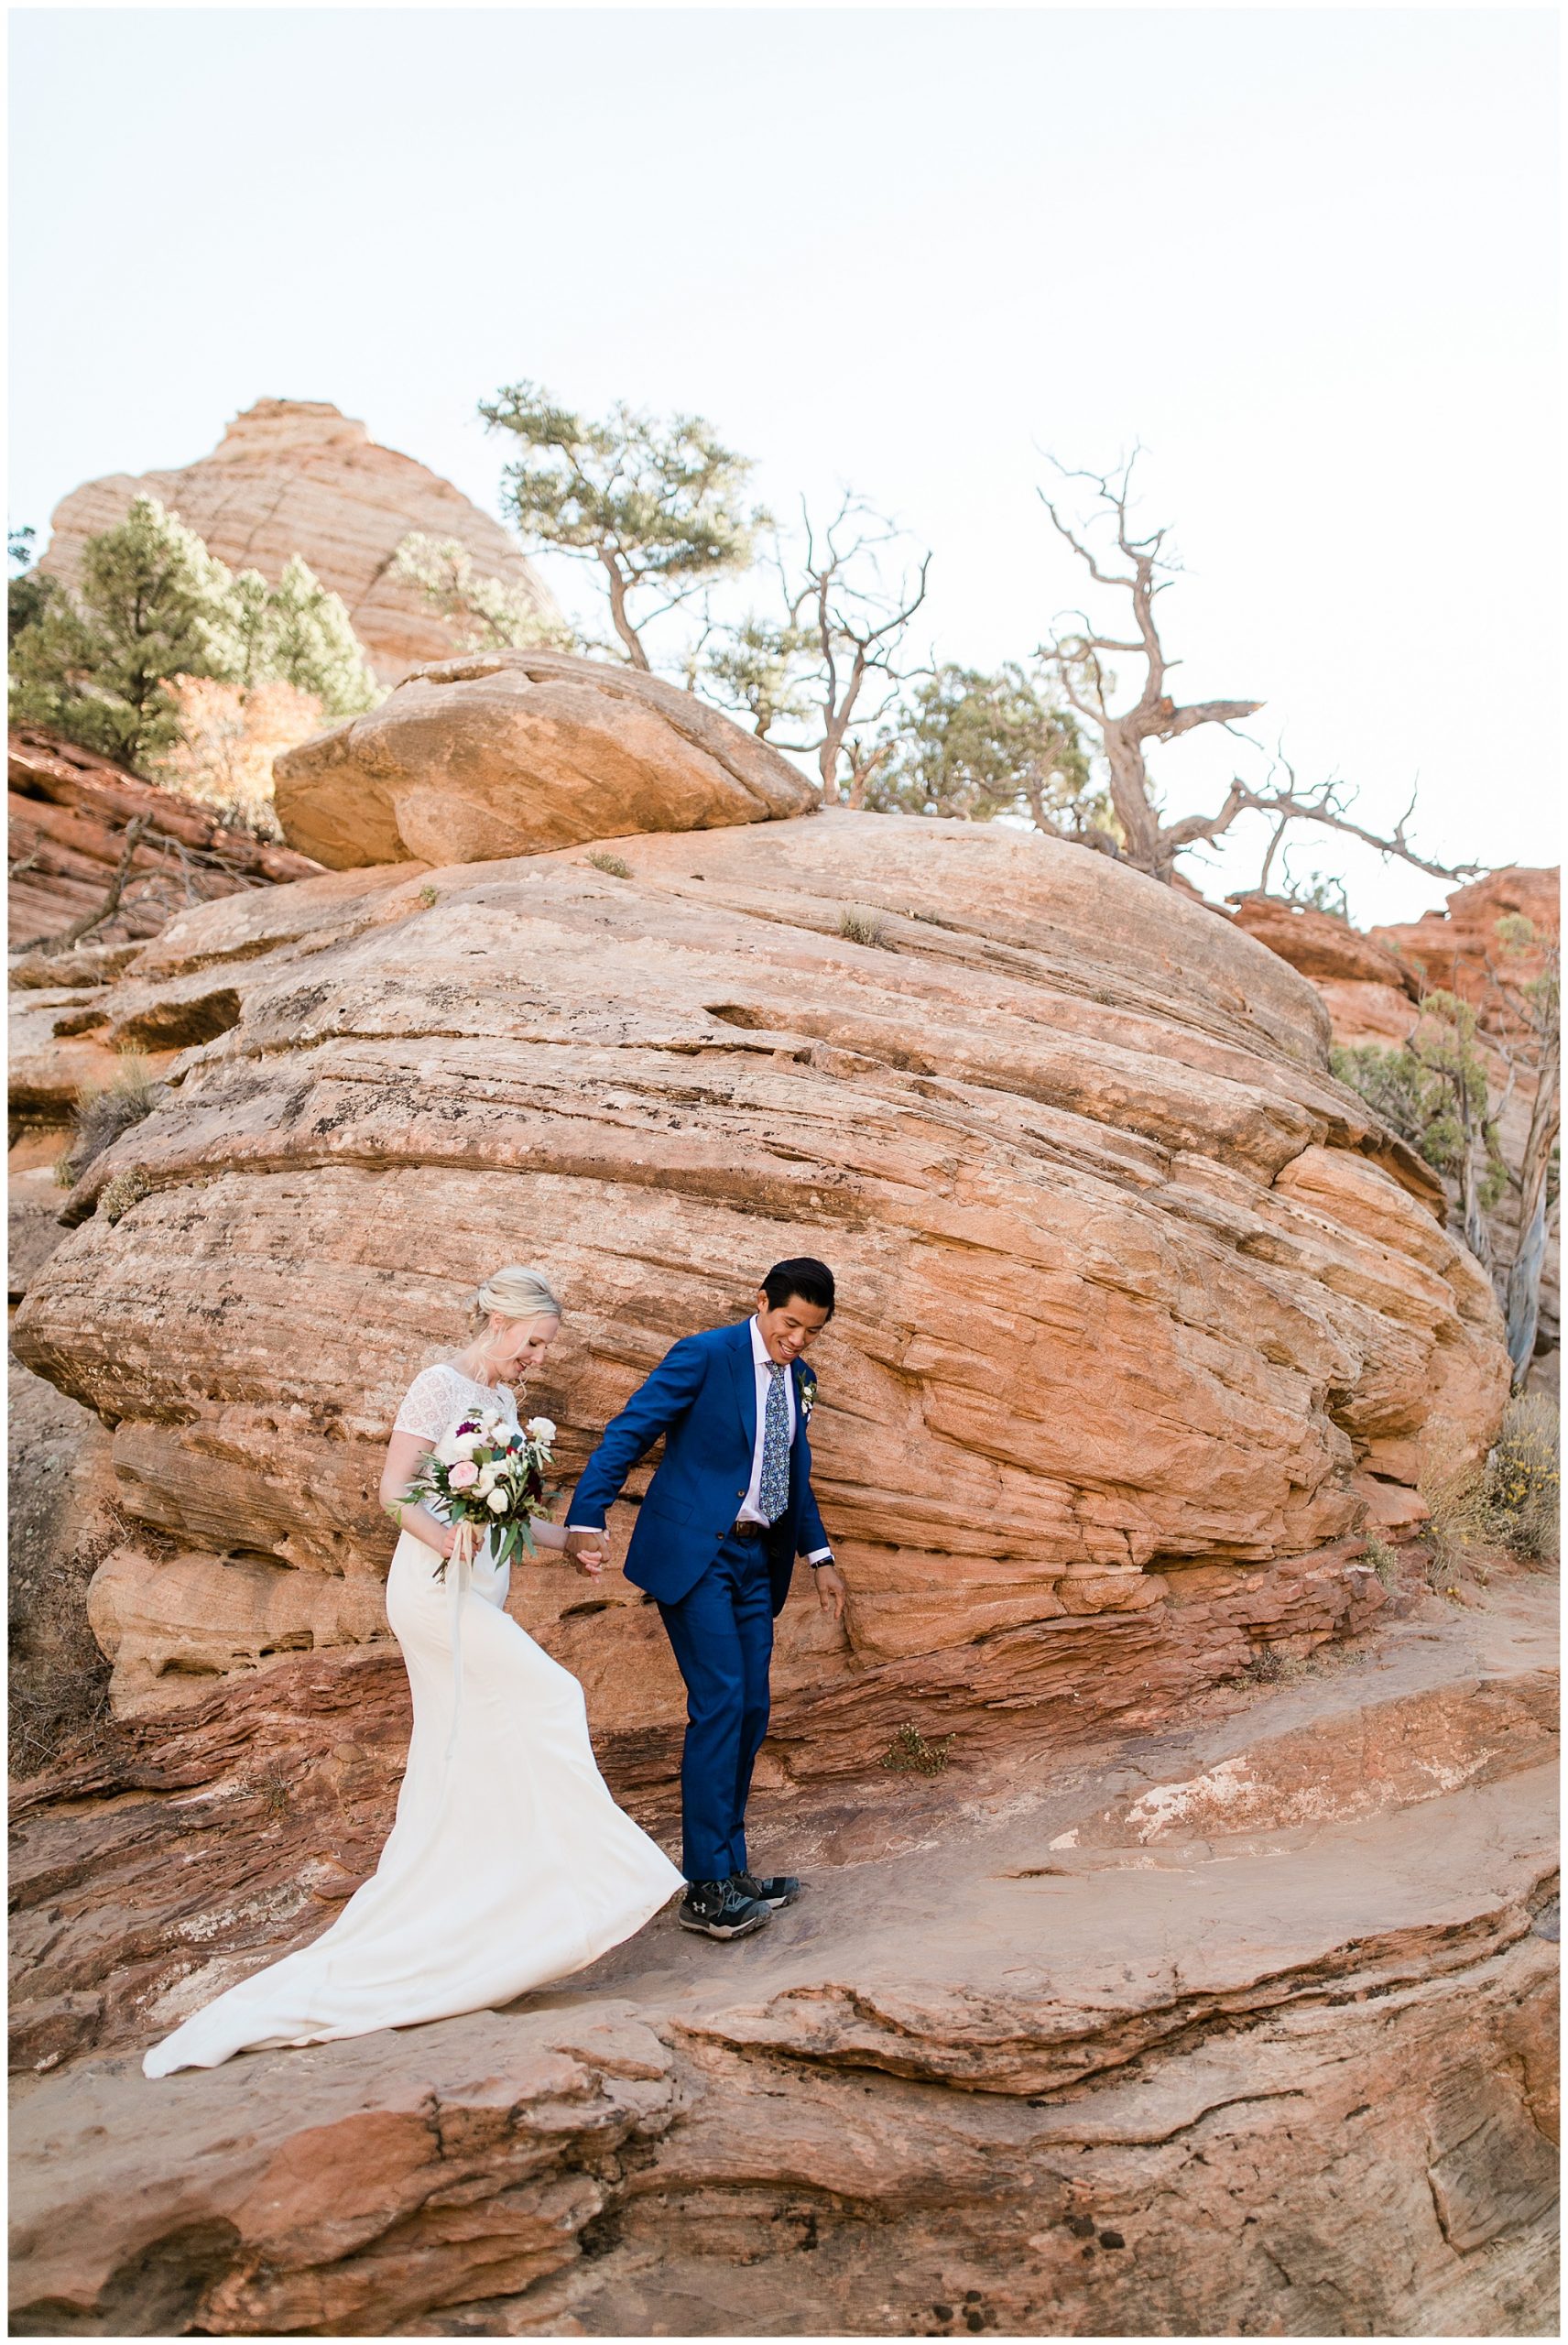 how to elope in zion national park